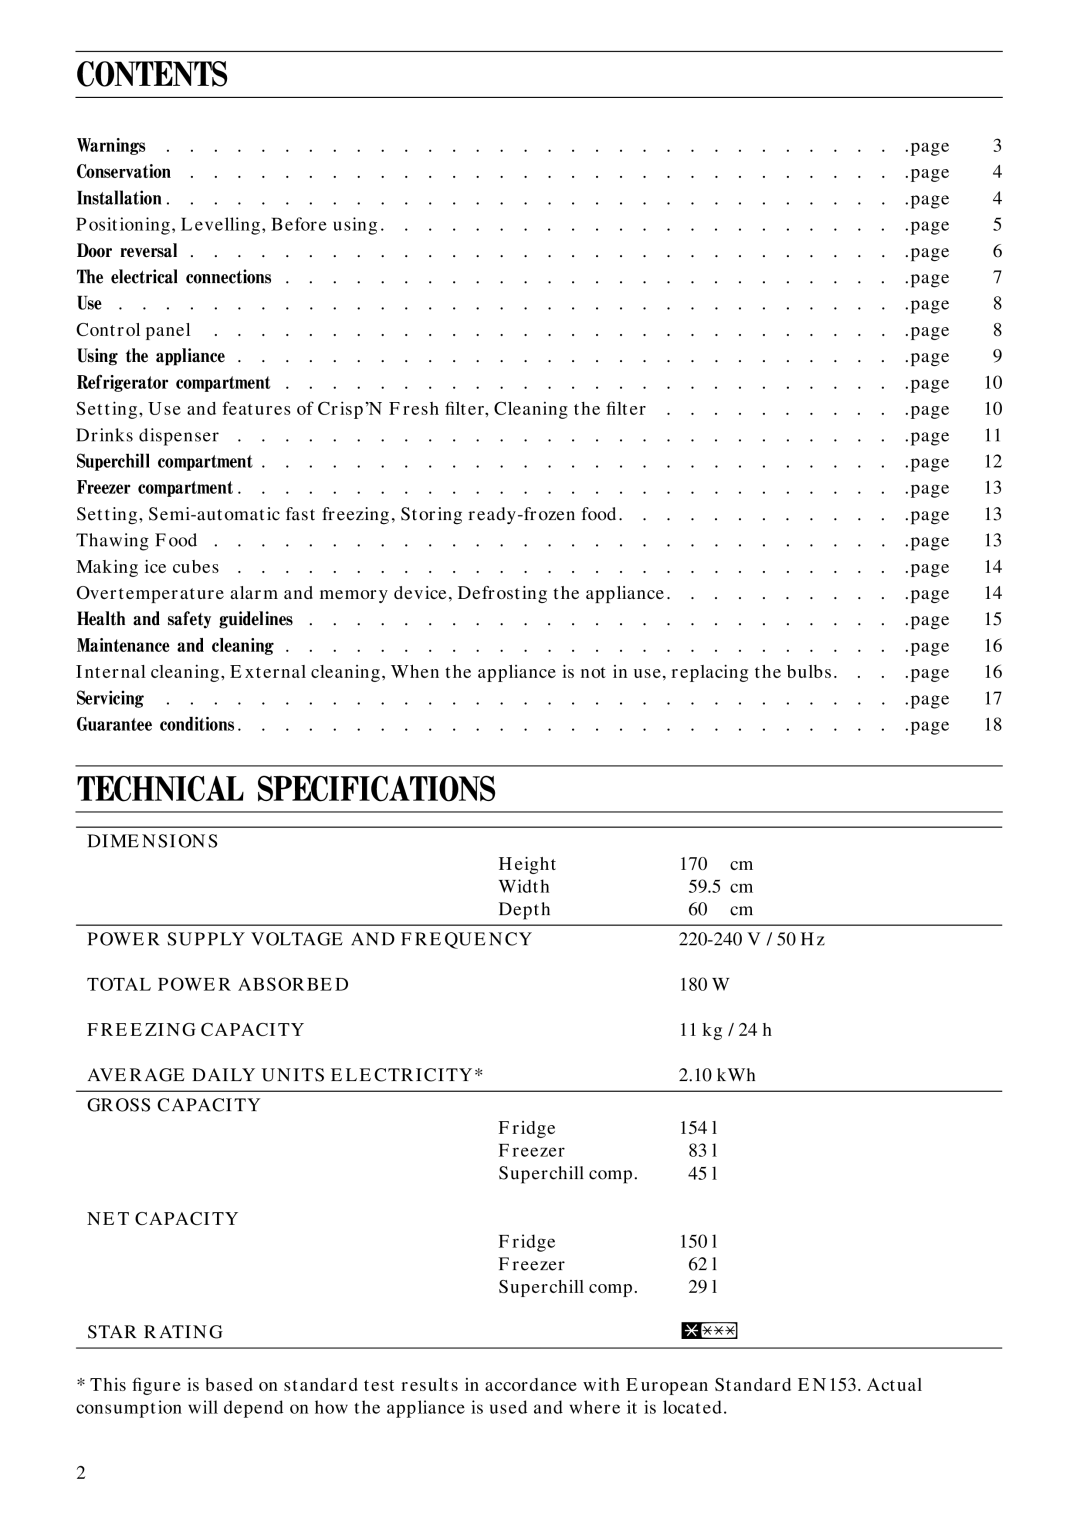 Zanussi ZFE 102/3T manual Contents, Technical Specifications 